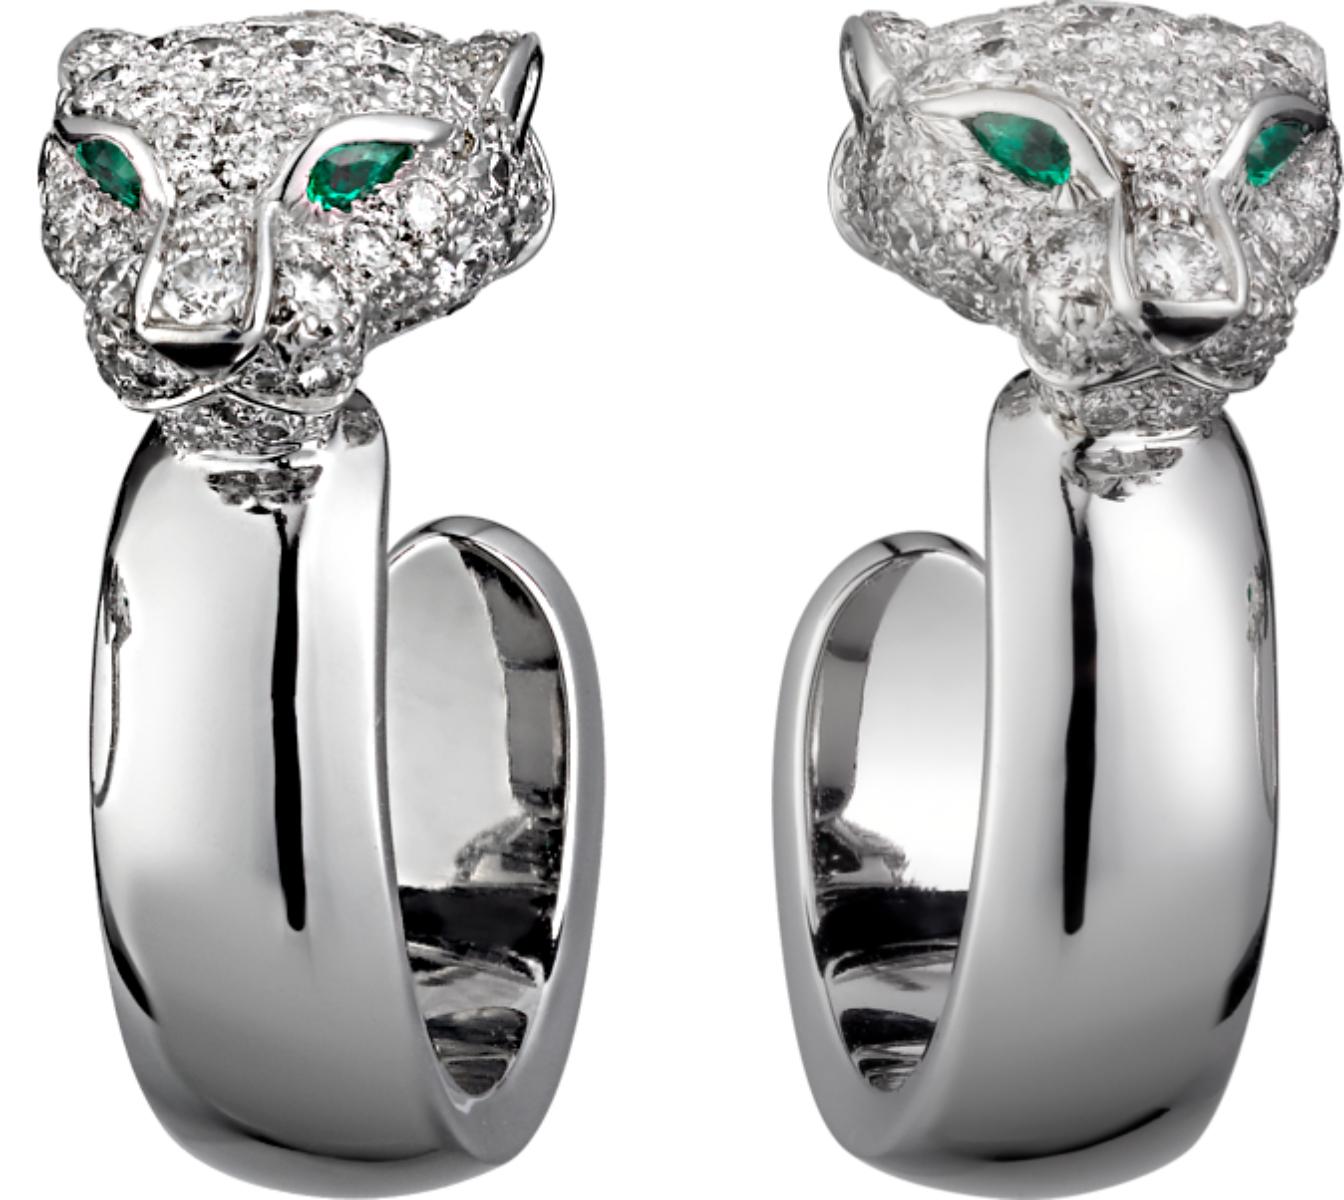 An incredible pair of iconic Cartier earrings from the Panthere collection, each Panthere head motif is adorned with the finest original Cartier round brilliant cut diamonds and 2 emeralds suspending a white gold hoop. The earrings include the